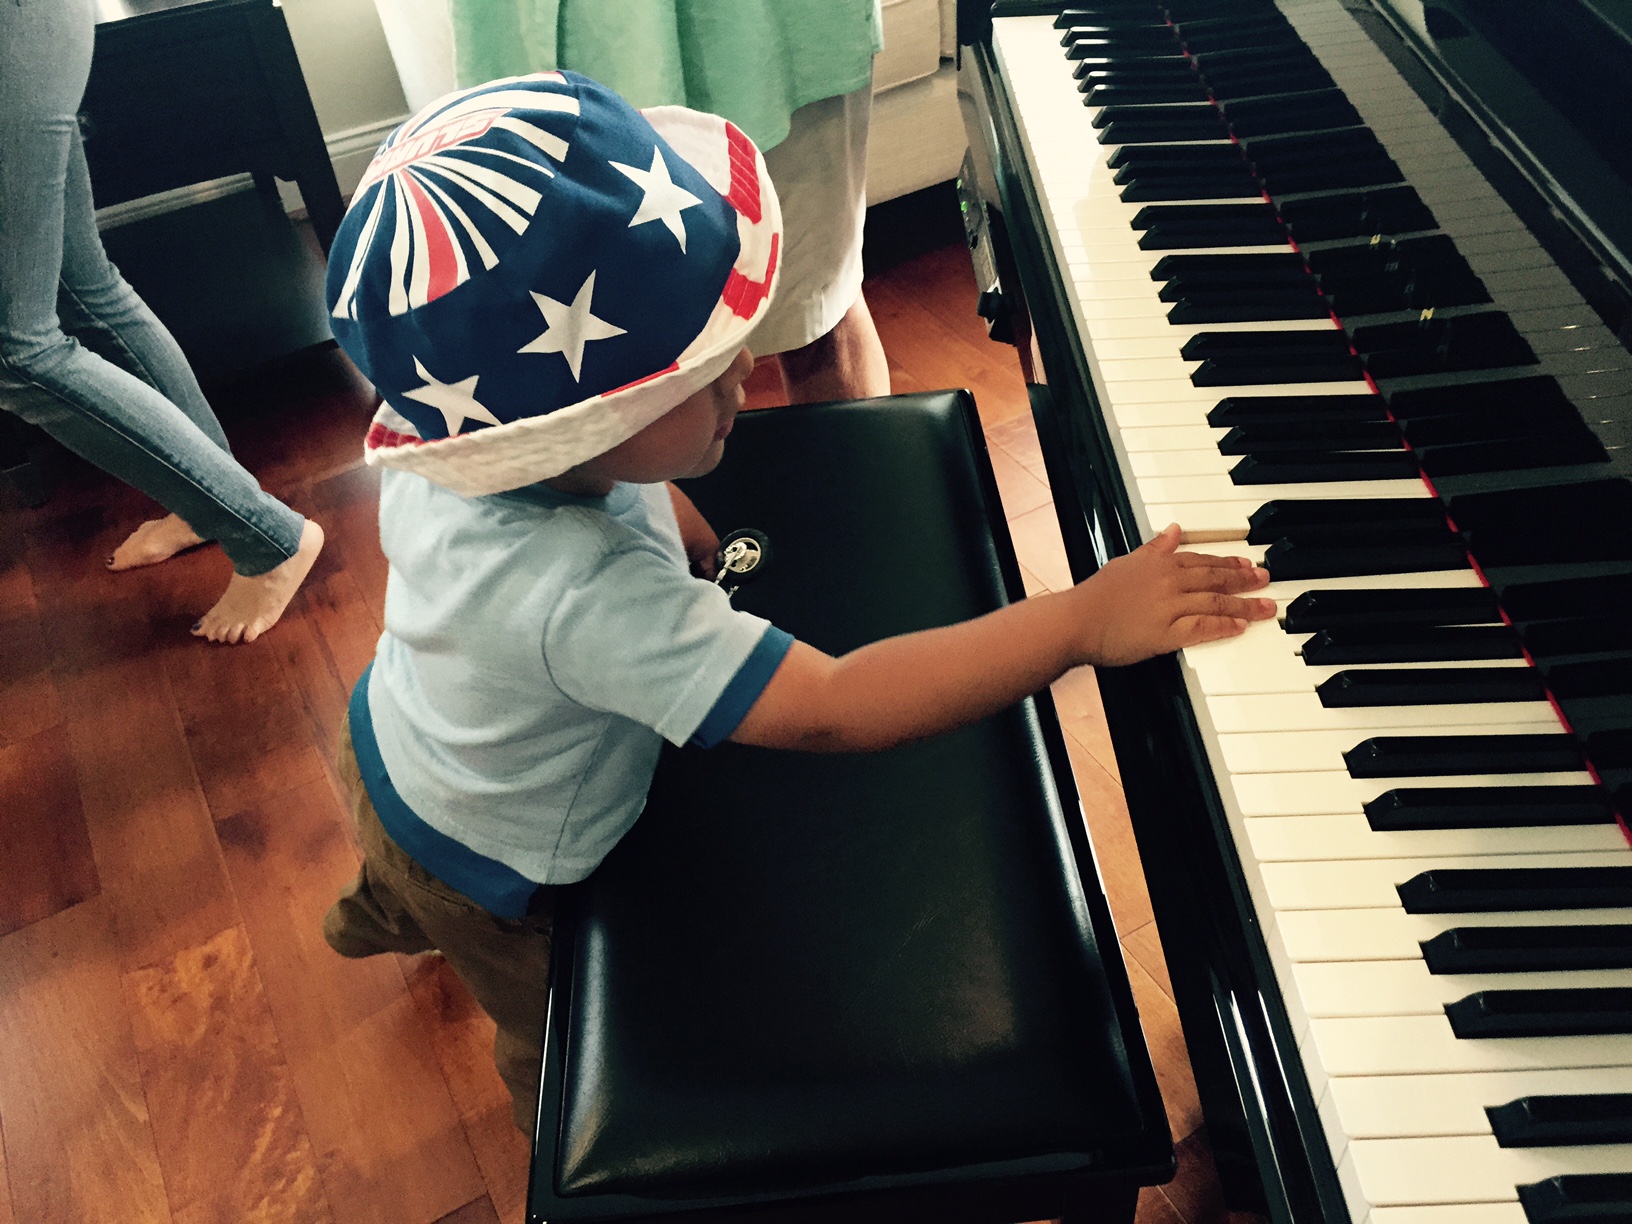 Porta's son plays on the piano in the new house. (WTOP/Max Smith)